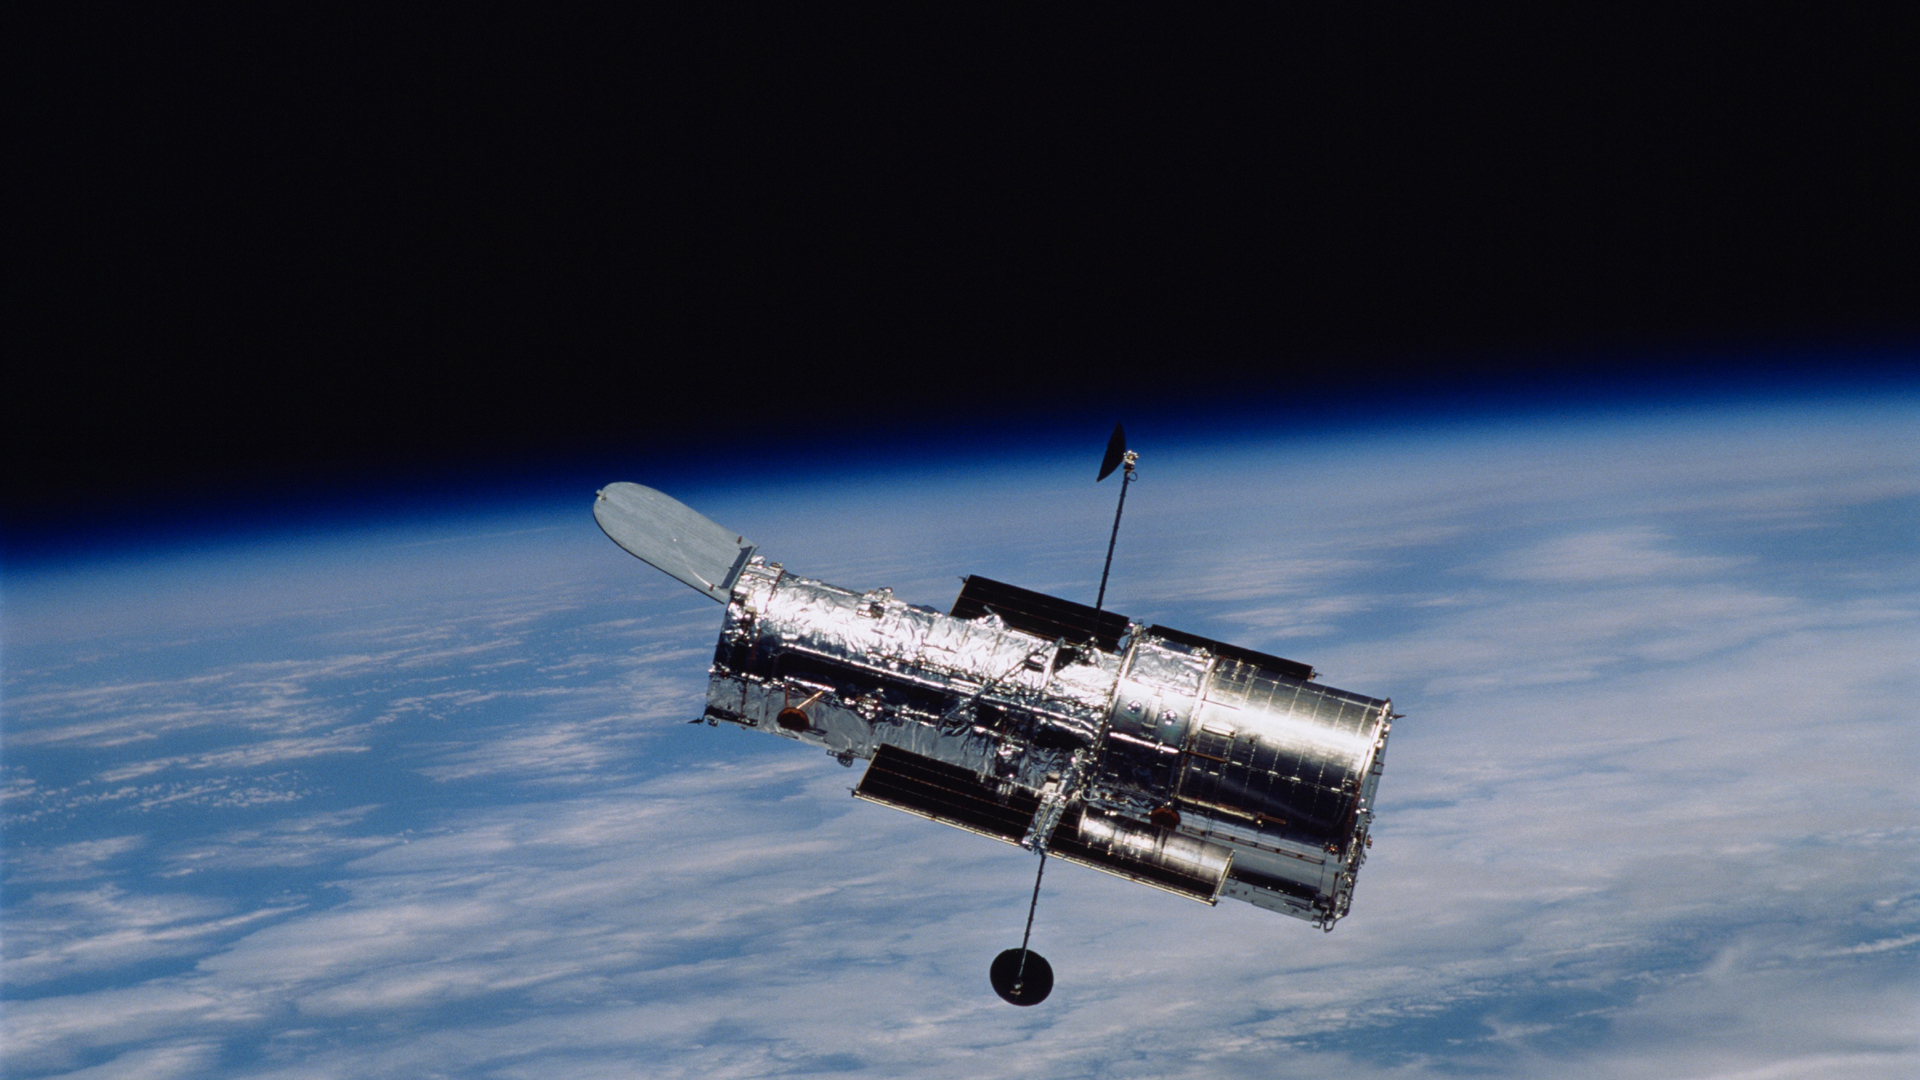 The Hubble Space Telescope flying above Earth pictured below.